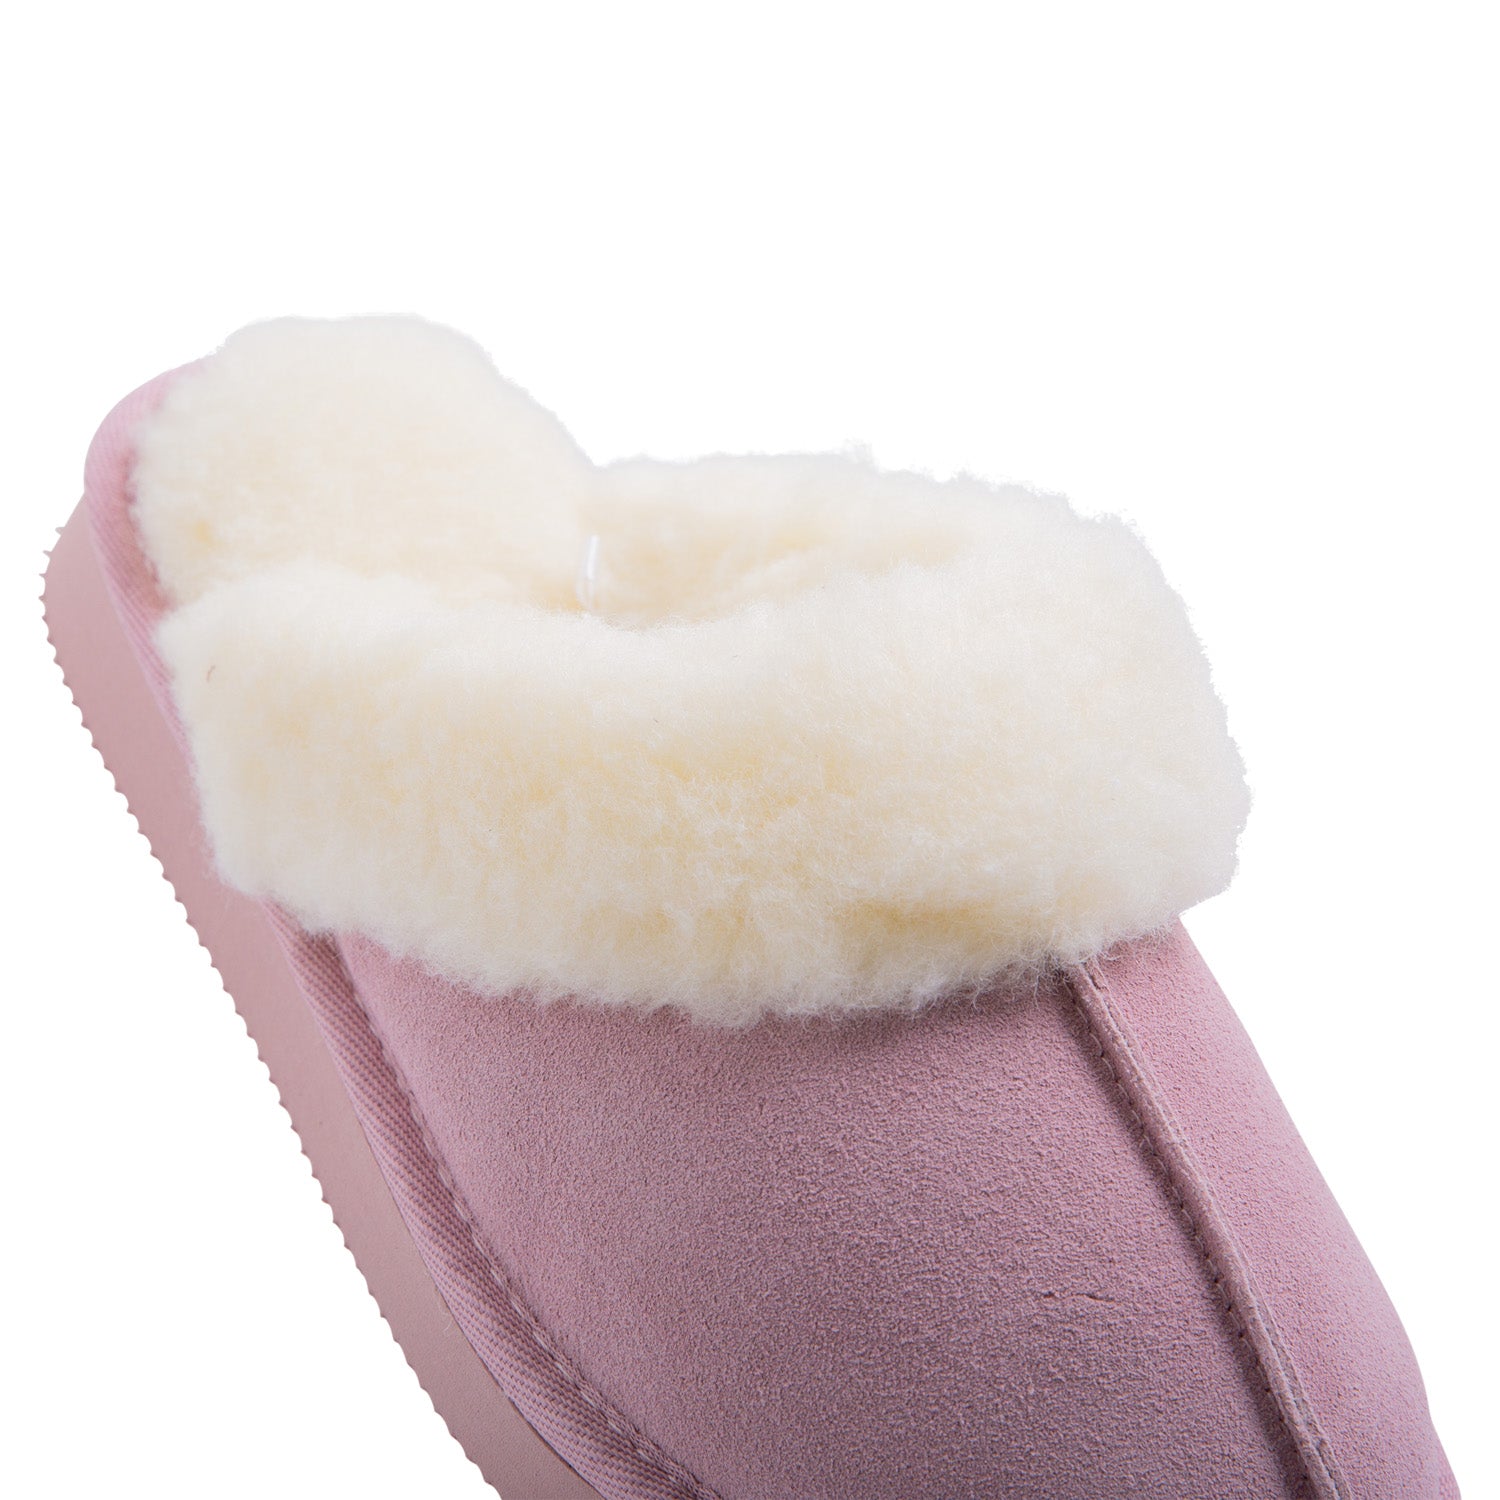 Royal Comfort Ugg Scuff Slippers Womens Leather Upper Wool Lining Breathable-Footwear-PEROZ Accessories